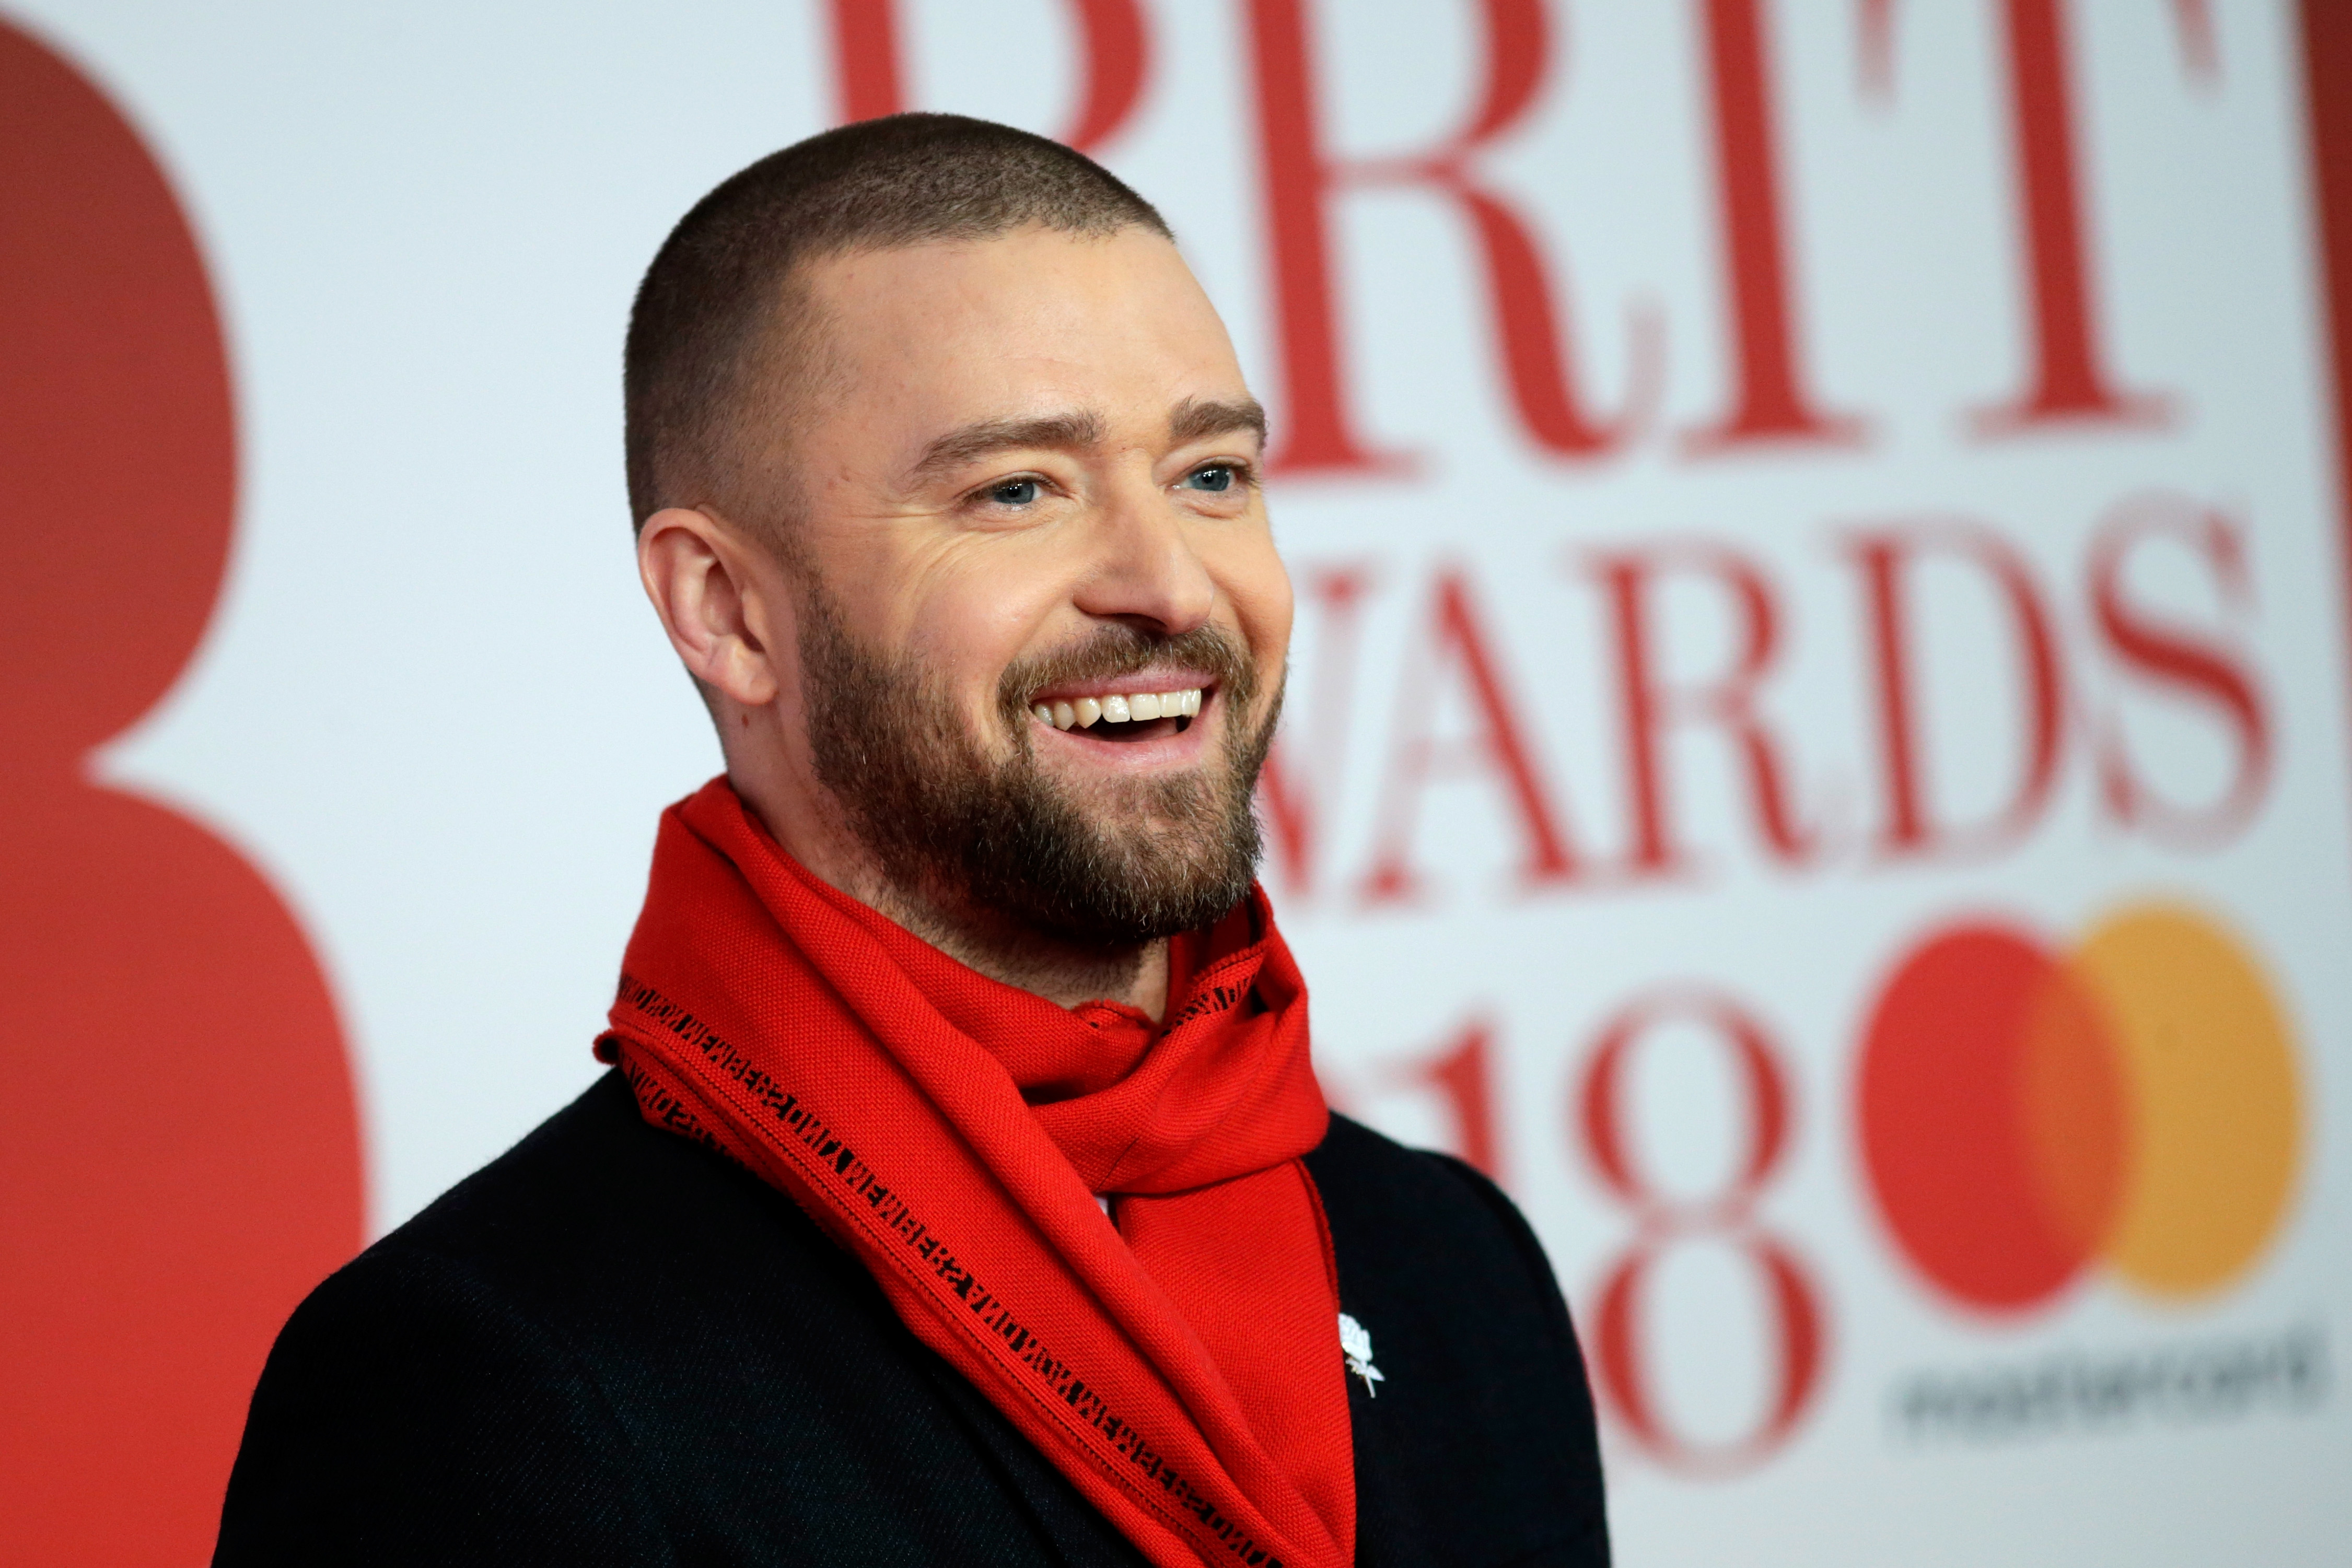 Justin Timberlake attends The BRIT Awards 2018 held at The O2 Arena in London, England on Feb. 21, 2018. (John Phillips—Getty Images)